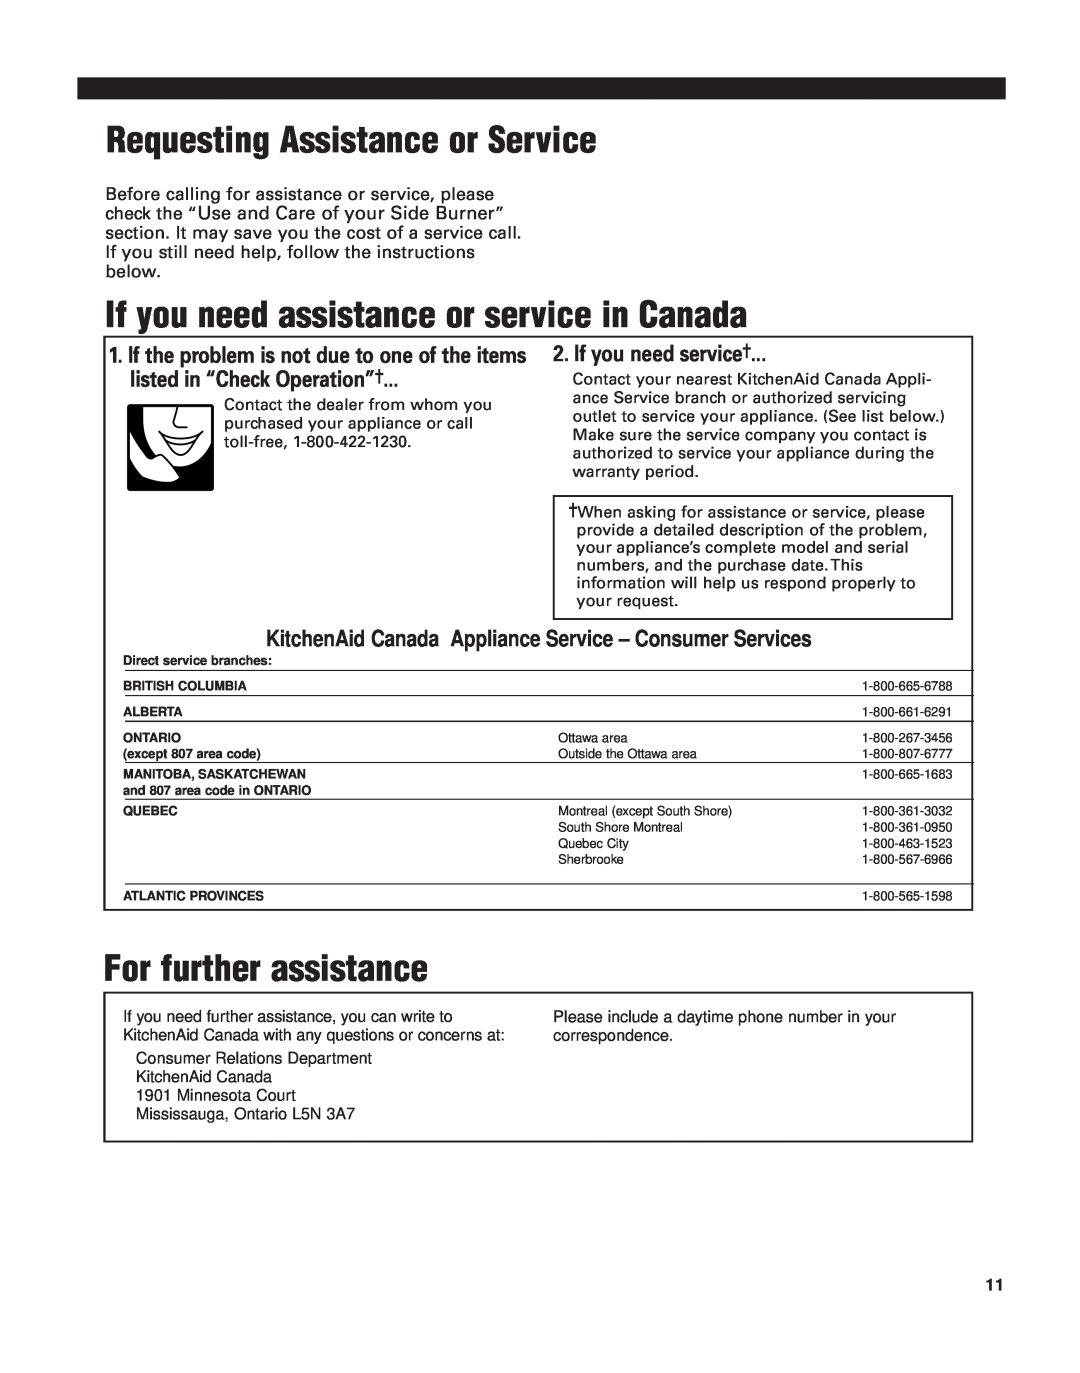 KitchenAid KSBN220 If you need assistance or service in Canada, listed in “Check Operation”, If you need service 